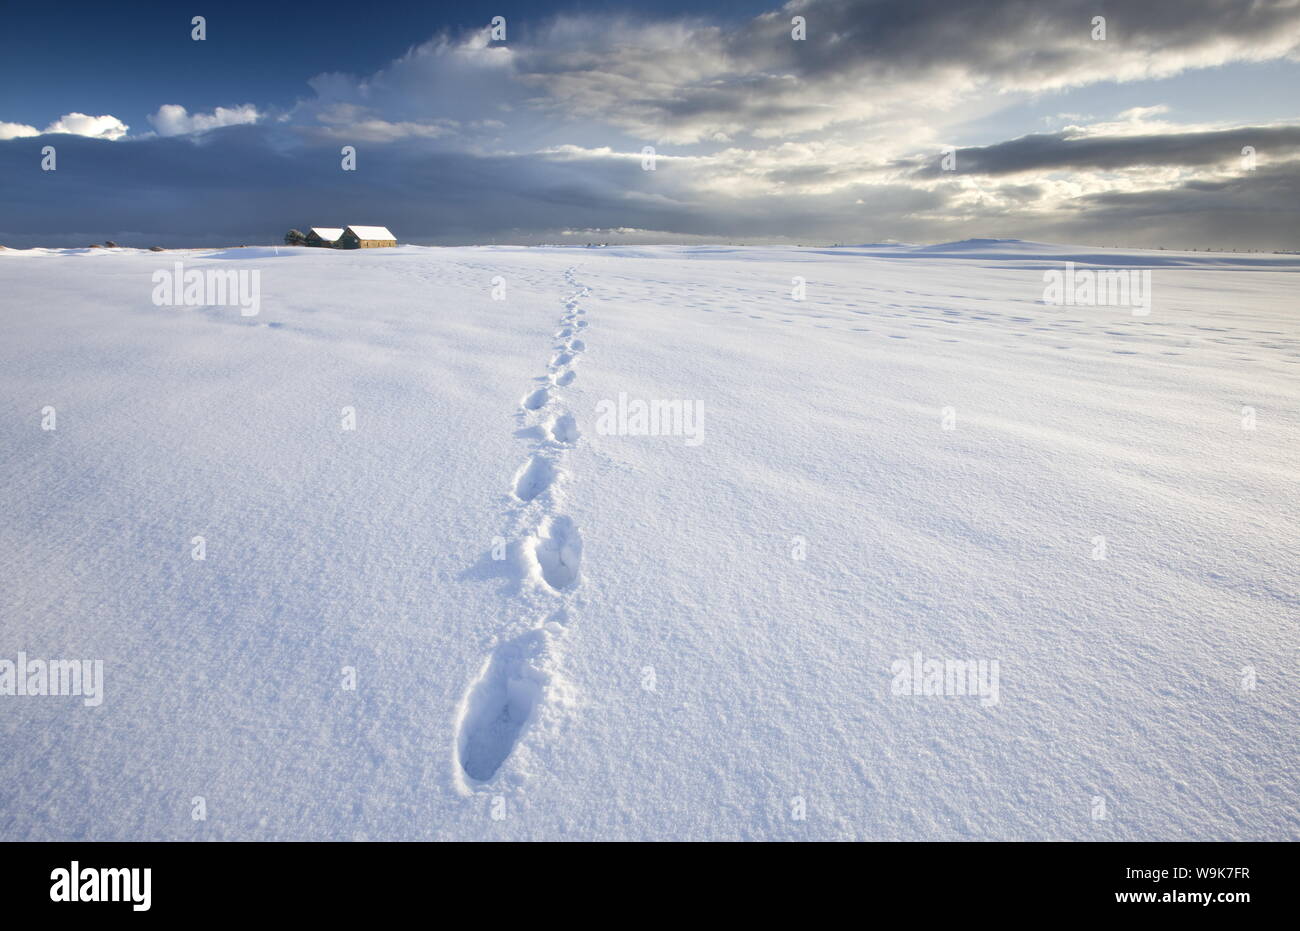 Footsteps in freshly-fallen snow leading off into distance towards dramatic winter sky, Alnmouth, near Alnwick, Northumberland, England, UK Stock Photo